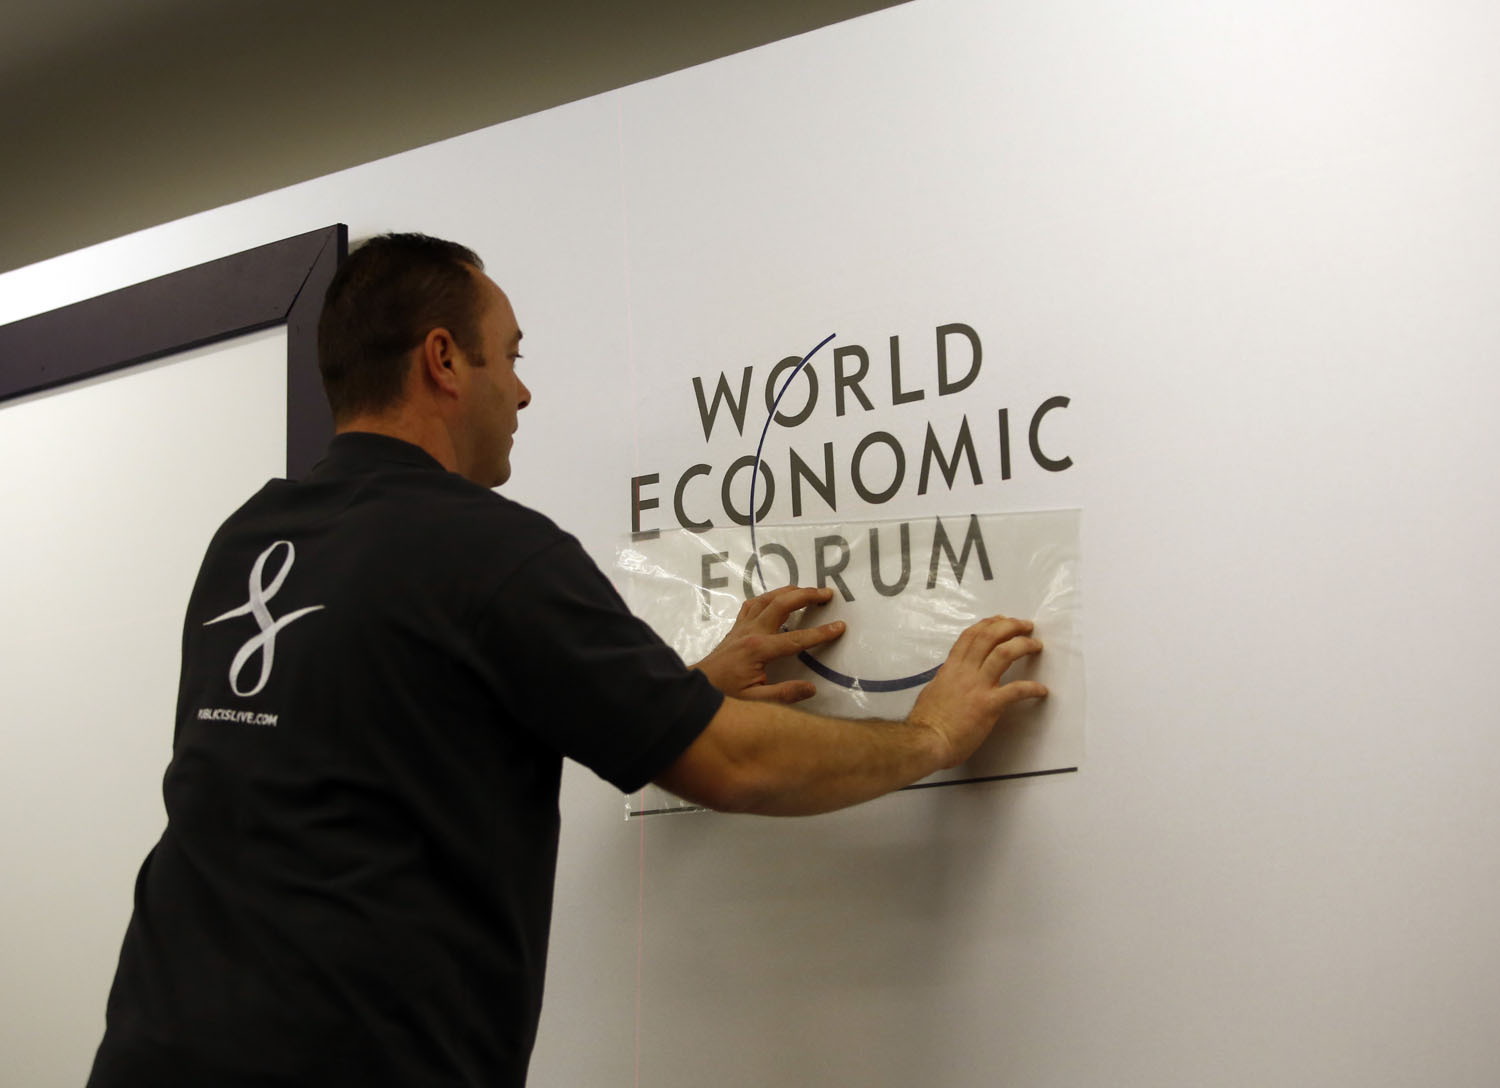 A worker prepares a logo for the World Economic Forum inside the Congress Center ahead of the World Economic Forum 2014 (WEF) meeting in Davos, Switzerland, on Sunday, Jan. 19, 2014.